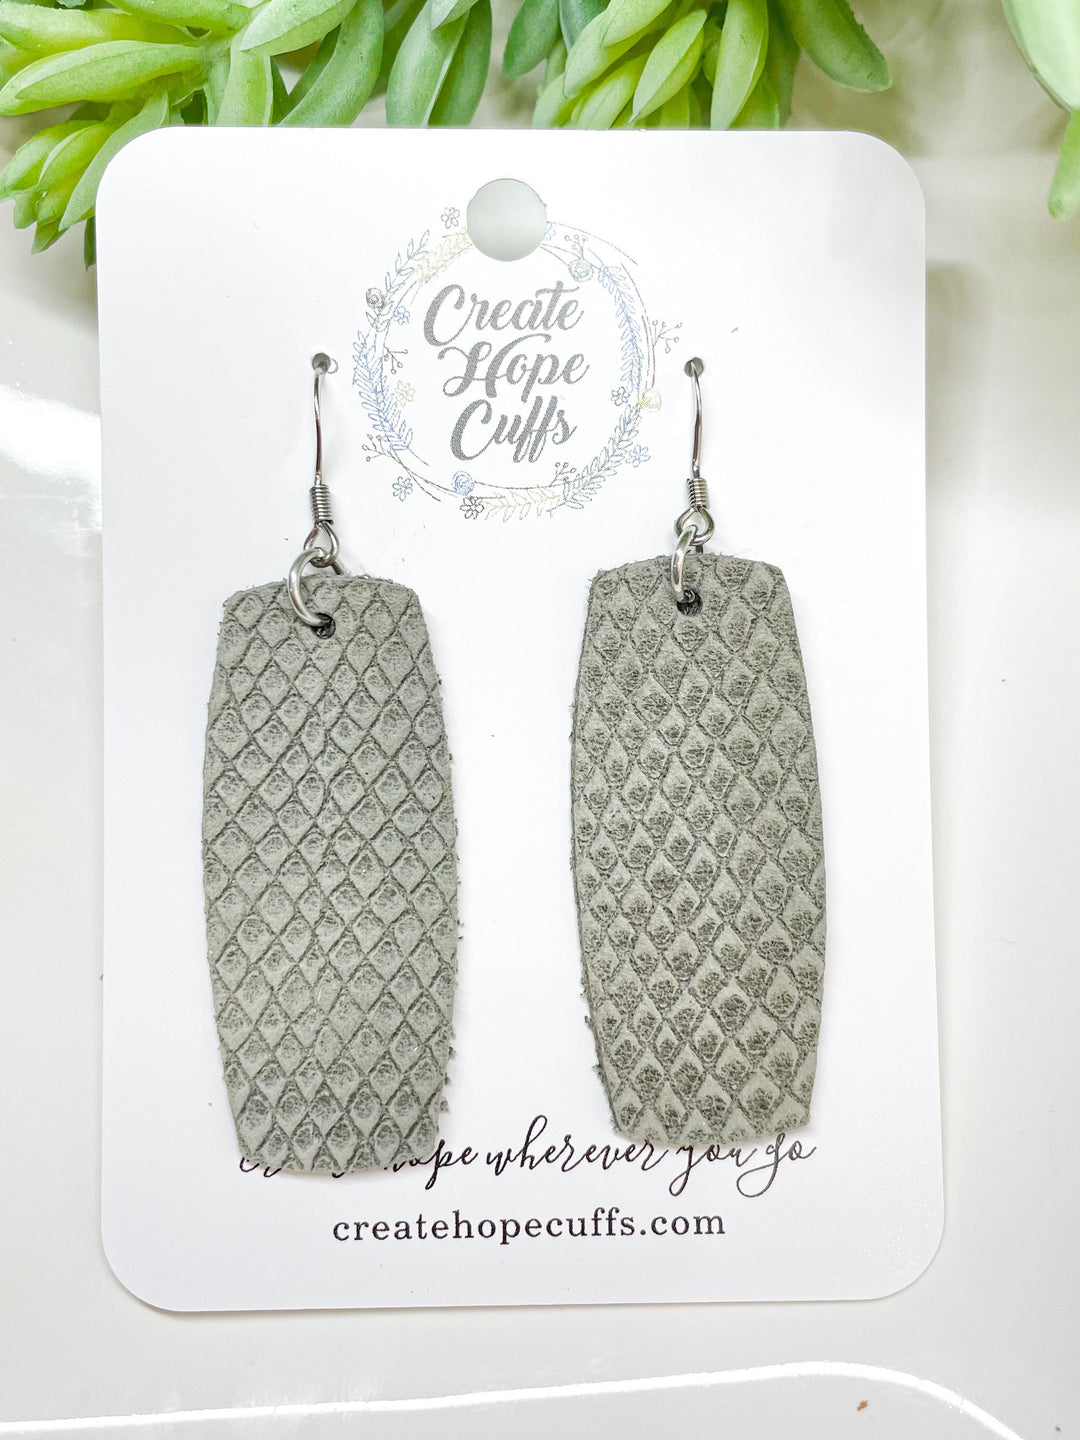 (Wholesale) Textured Grey Suede Leather Earrings | Stacked | Hypoallergenic | Women Leather Earrings Create Hope Cuffs Short Bar 